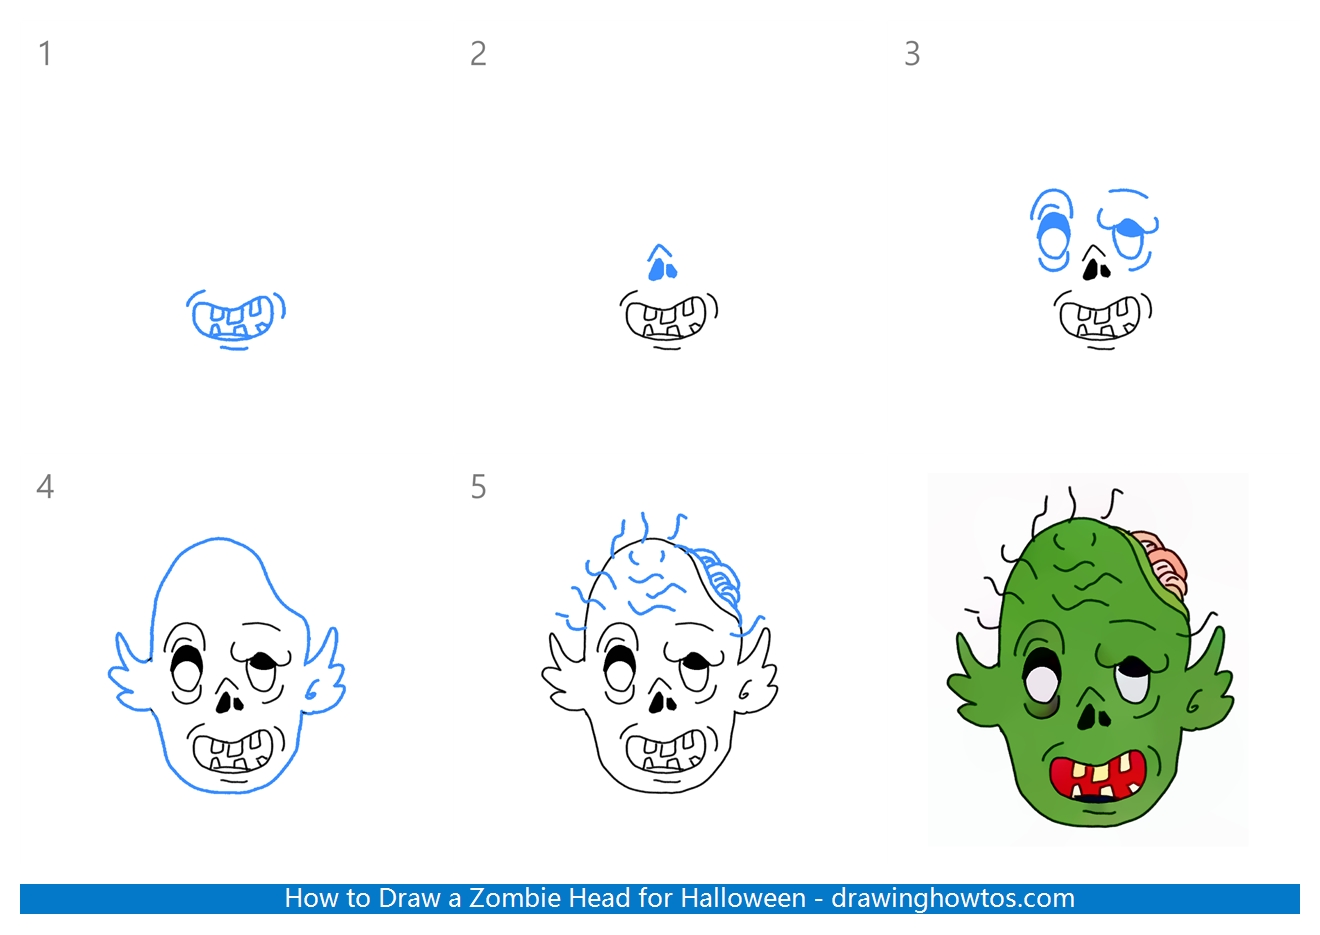 How to Draw a Zombie Head Step by Step